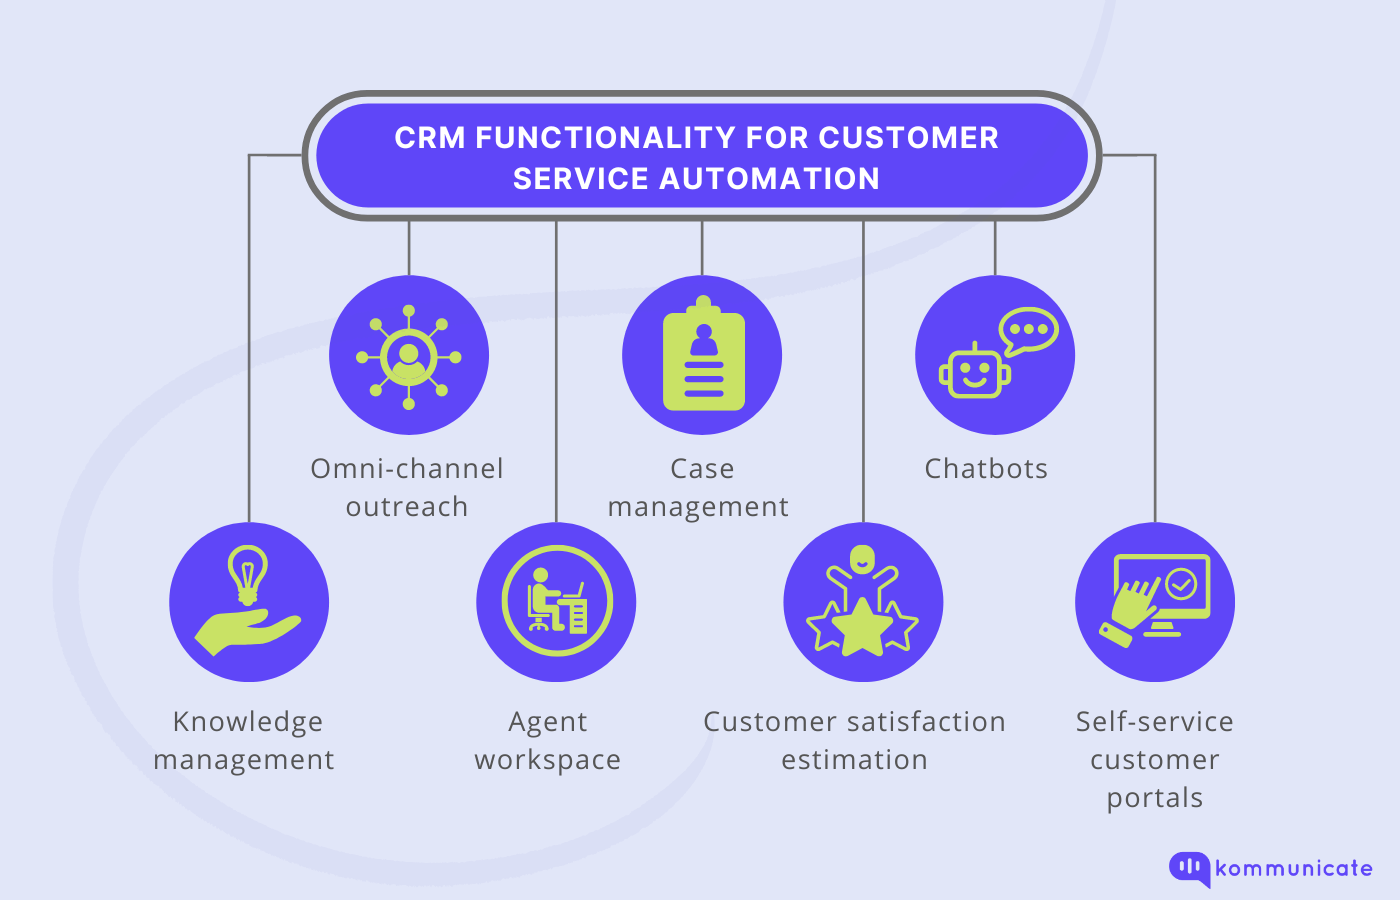 CRM functionality for Customer Service Automation